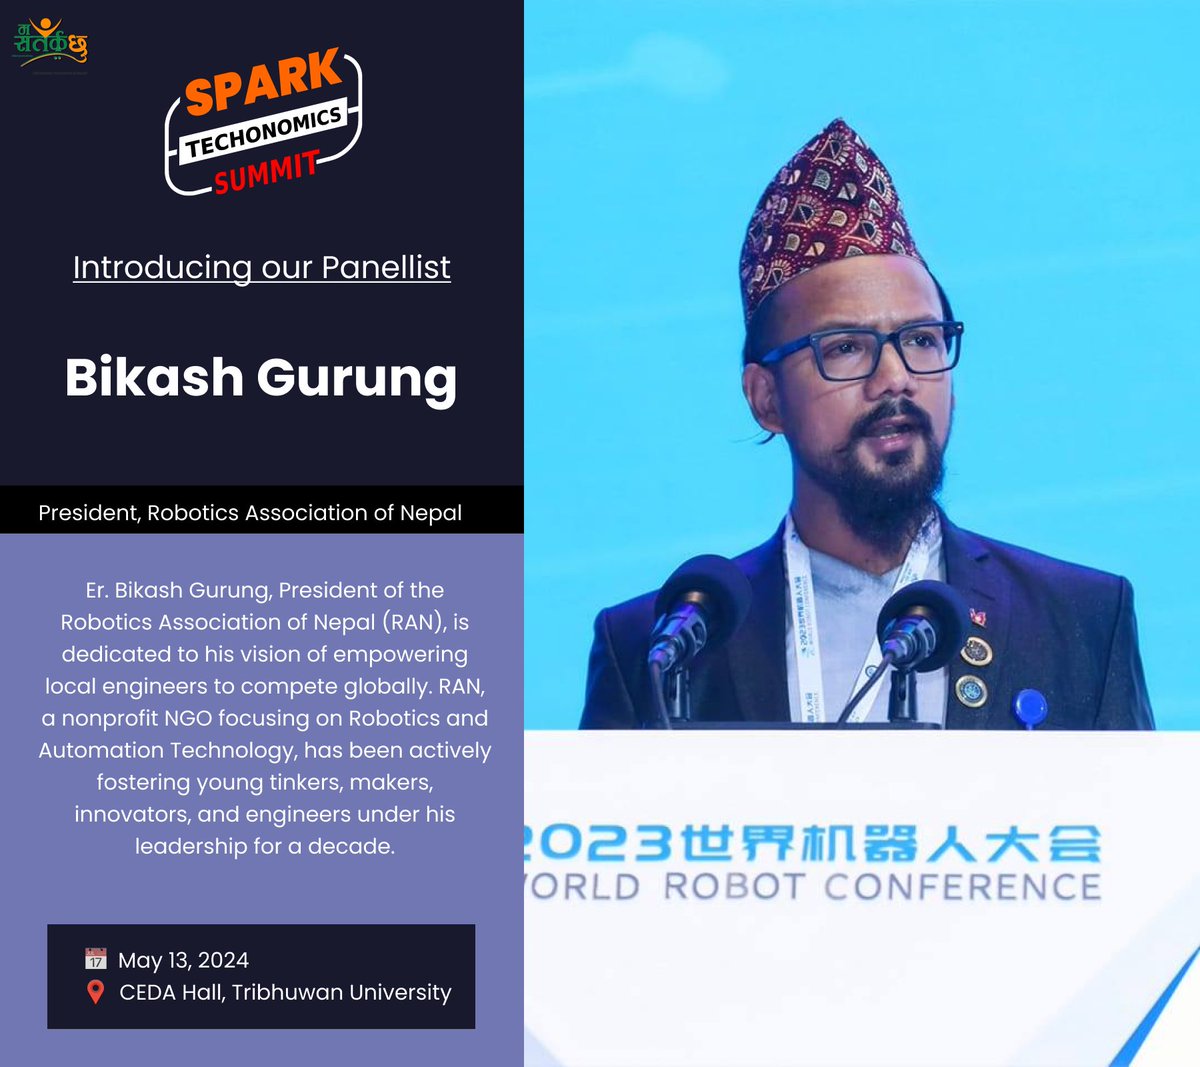 Join us in welcoming Bikash Gurung, a visionary in robotics, AI, and entrepreneurship, to Spark Techonomics Summit! #TechonomicsSummit #RoboticsAI Participation Registration Form: bit.ly/sts-join StartUp Presentation Registration Form: bit.ly/sts-startup